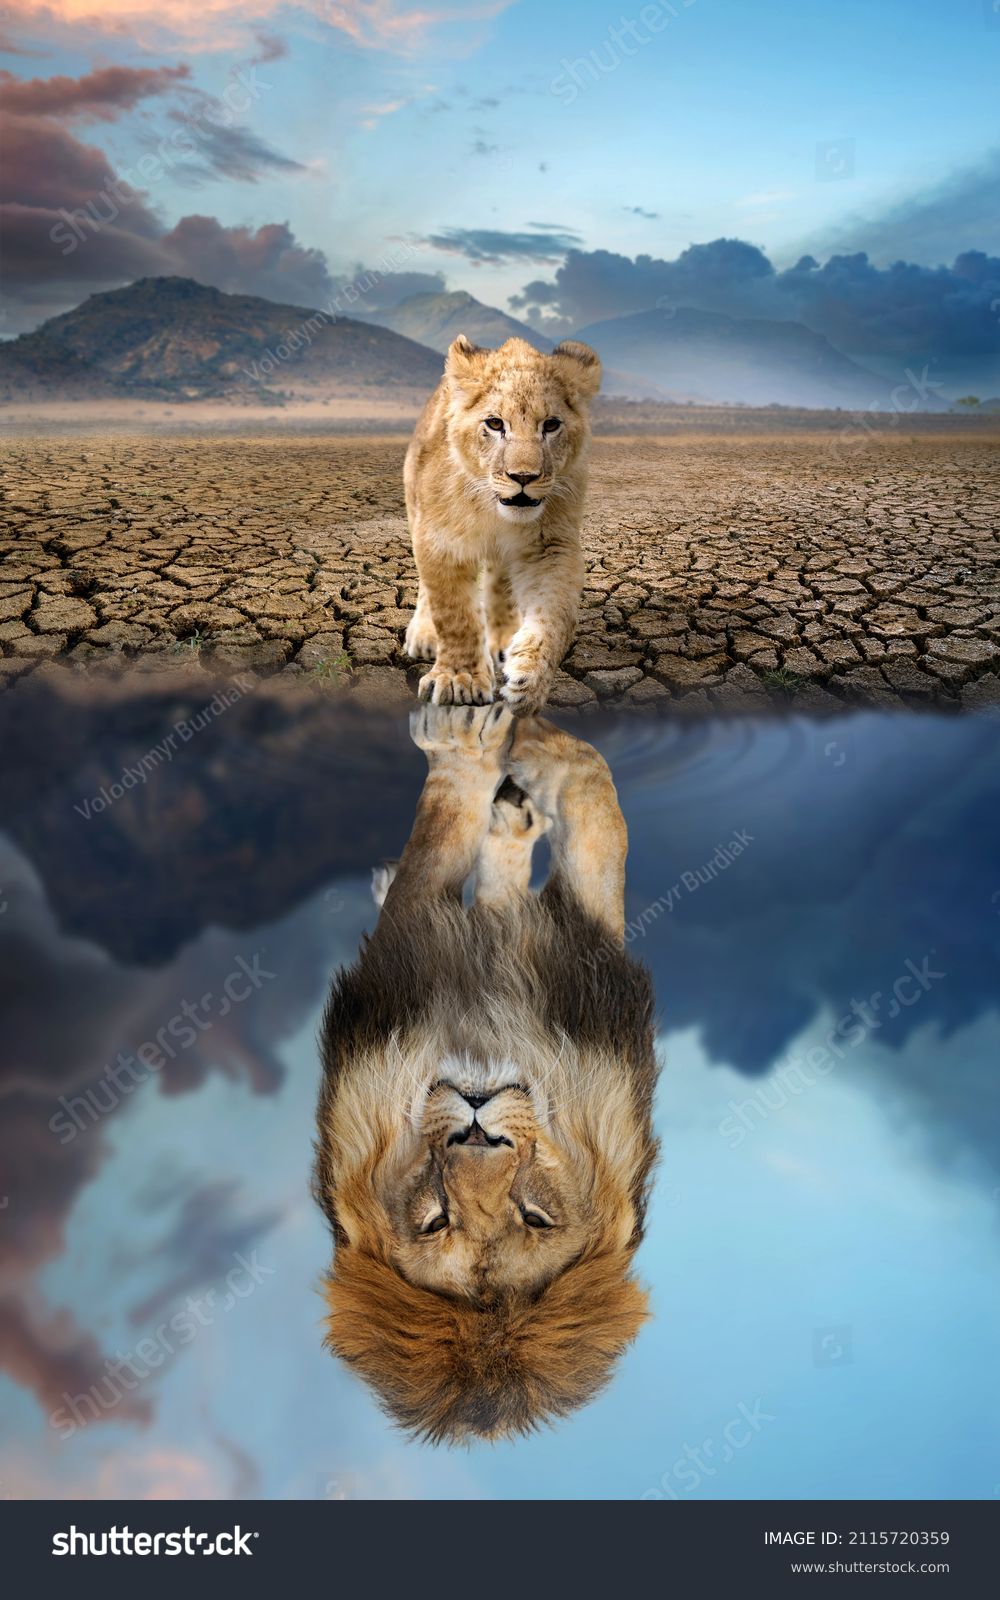 Lion cub looking the reflection of an adult lion in the water on a background of mountains #2115720359